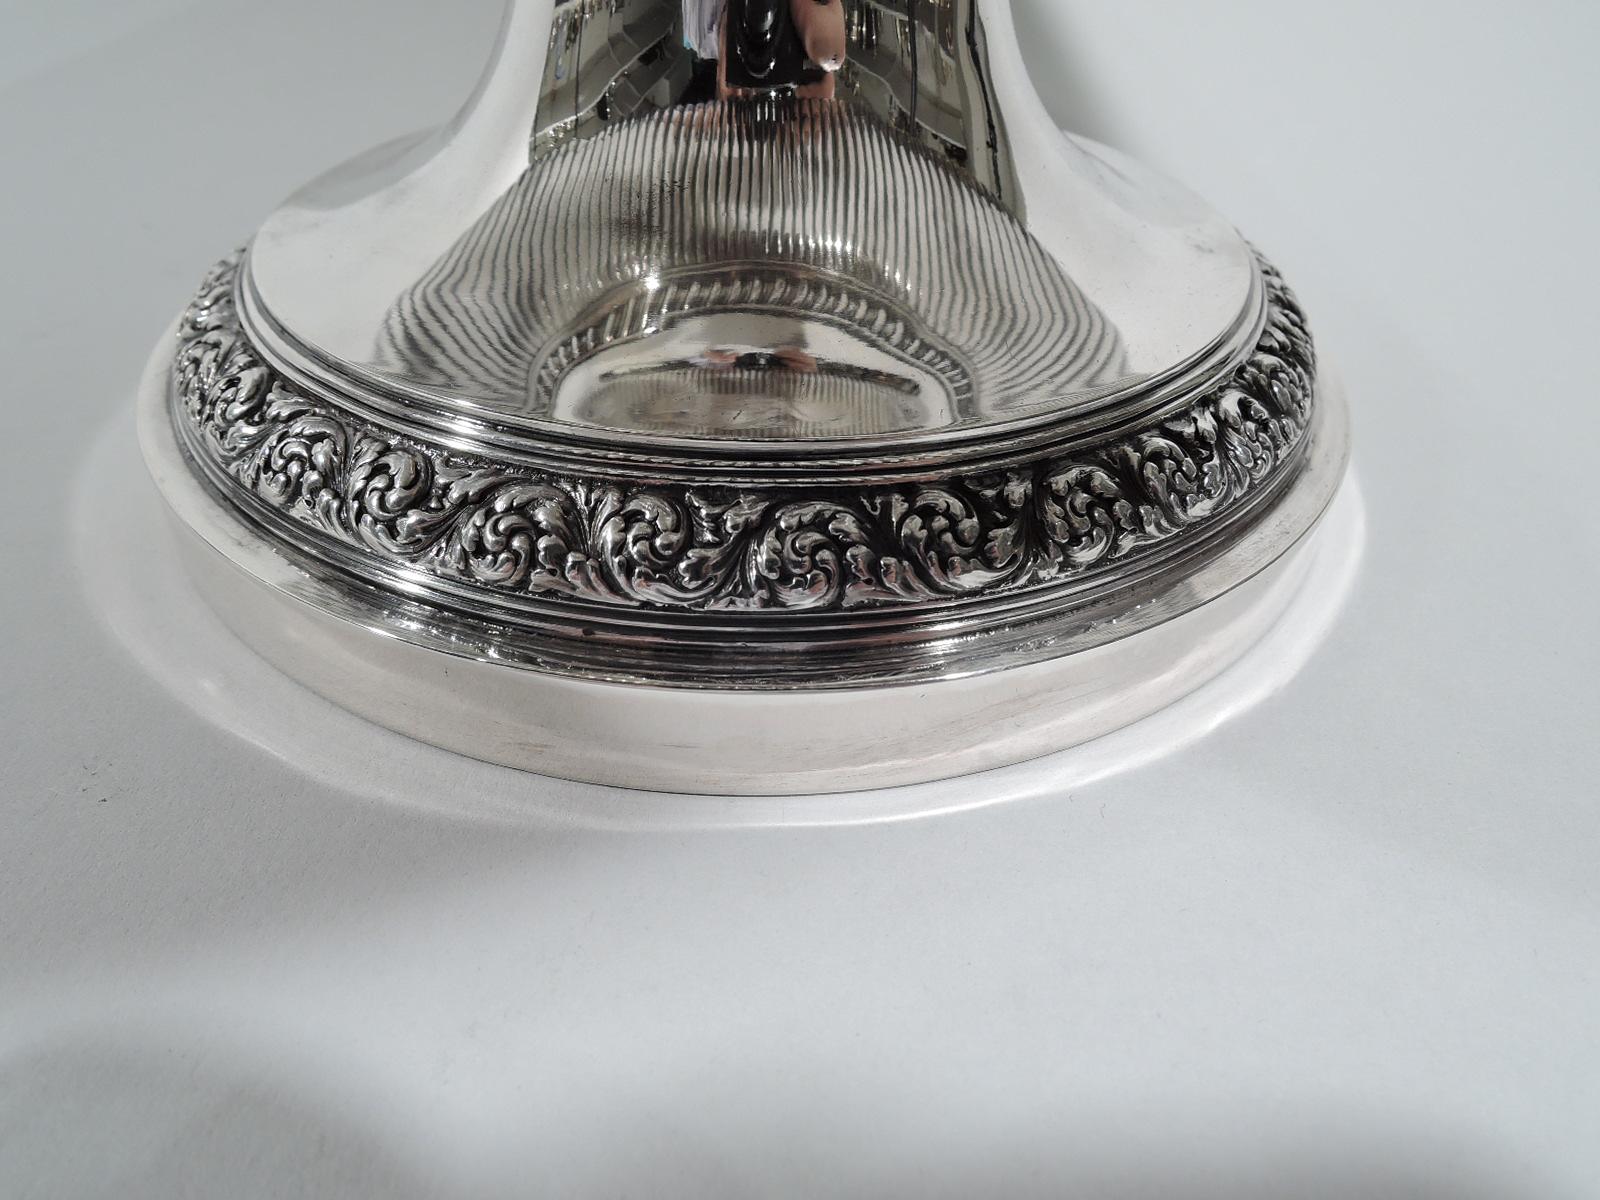 North American Stylish Tiffany Sterling Silver Centerpiece Compote